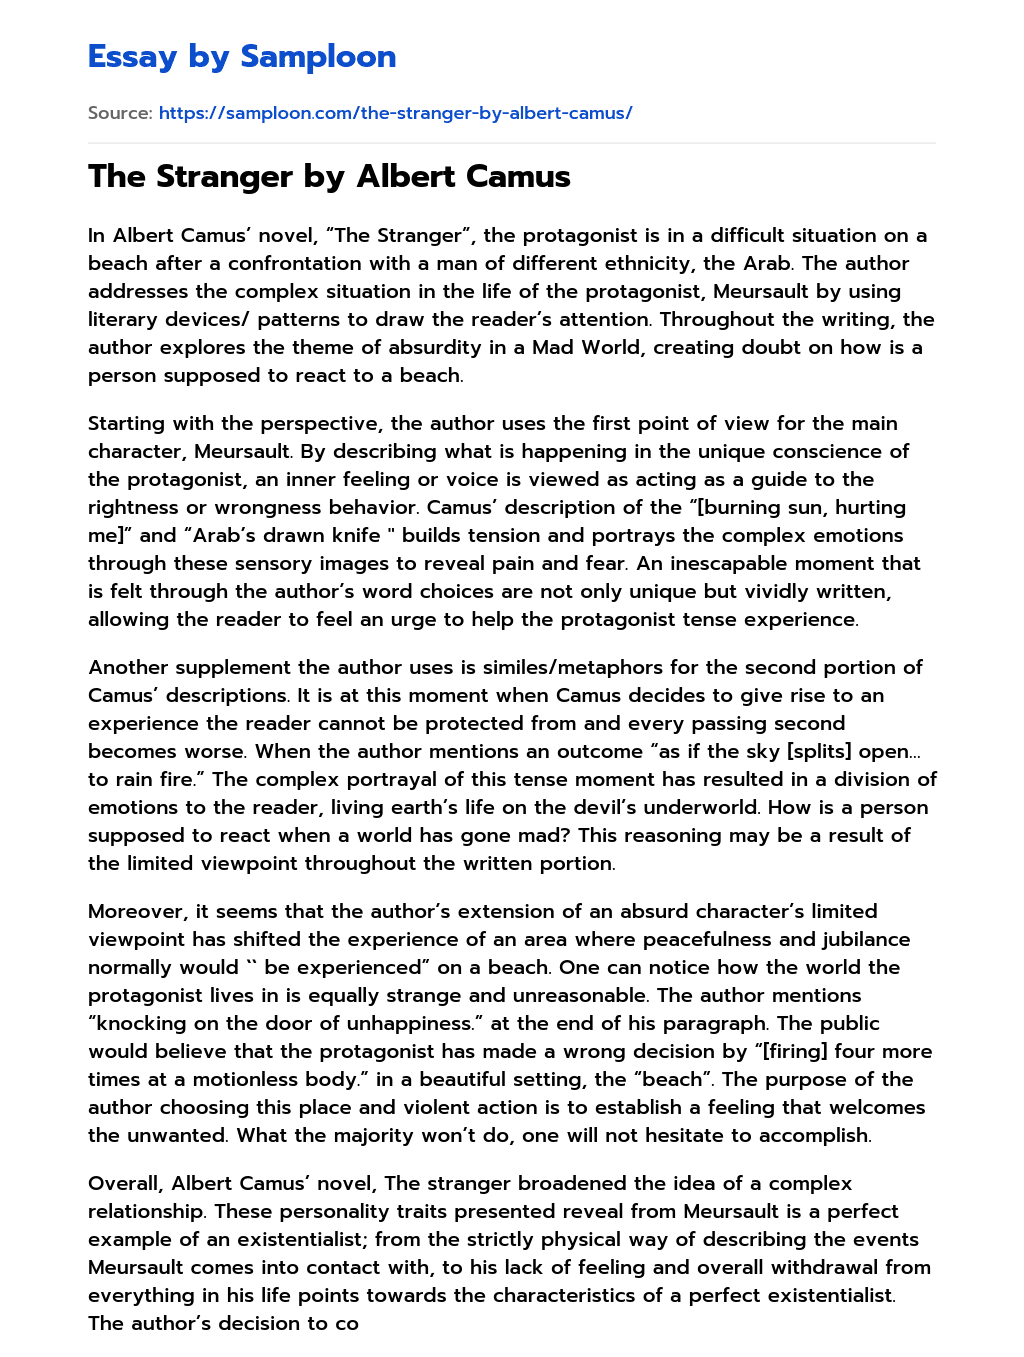 essay about the stranger